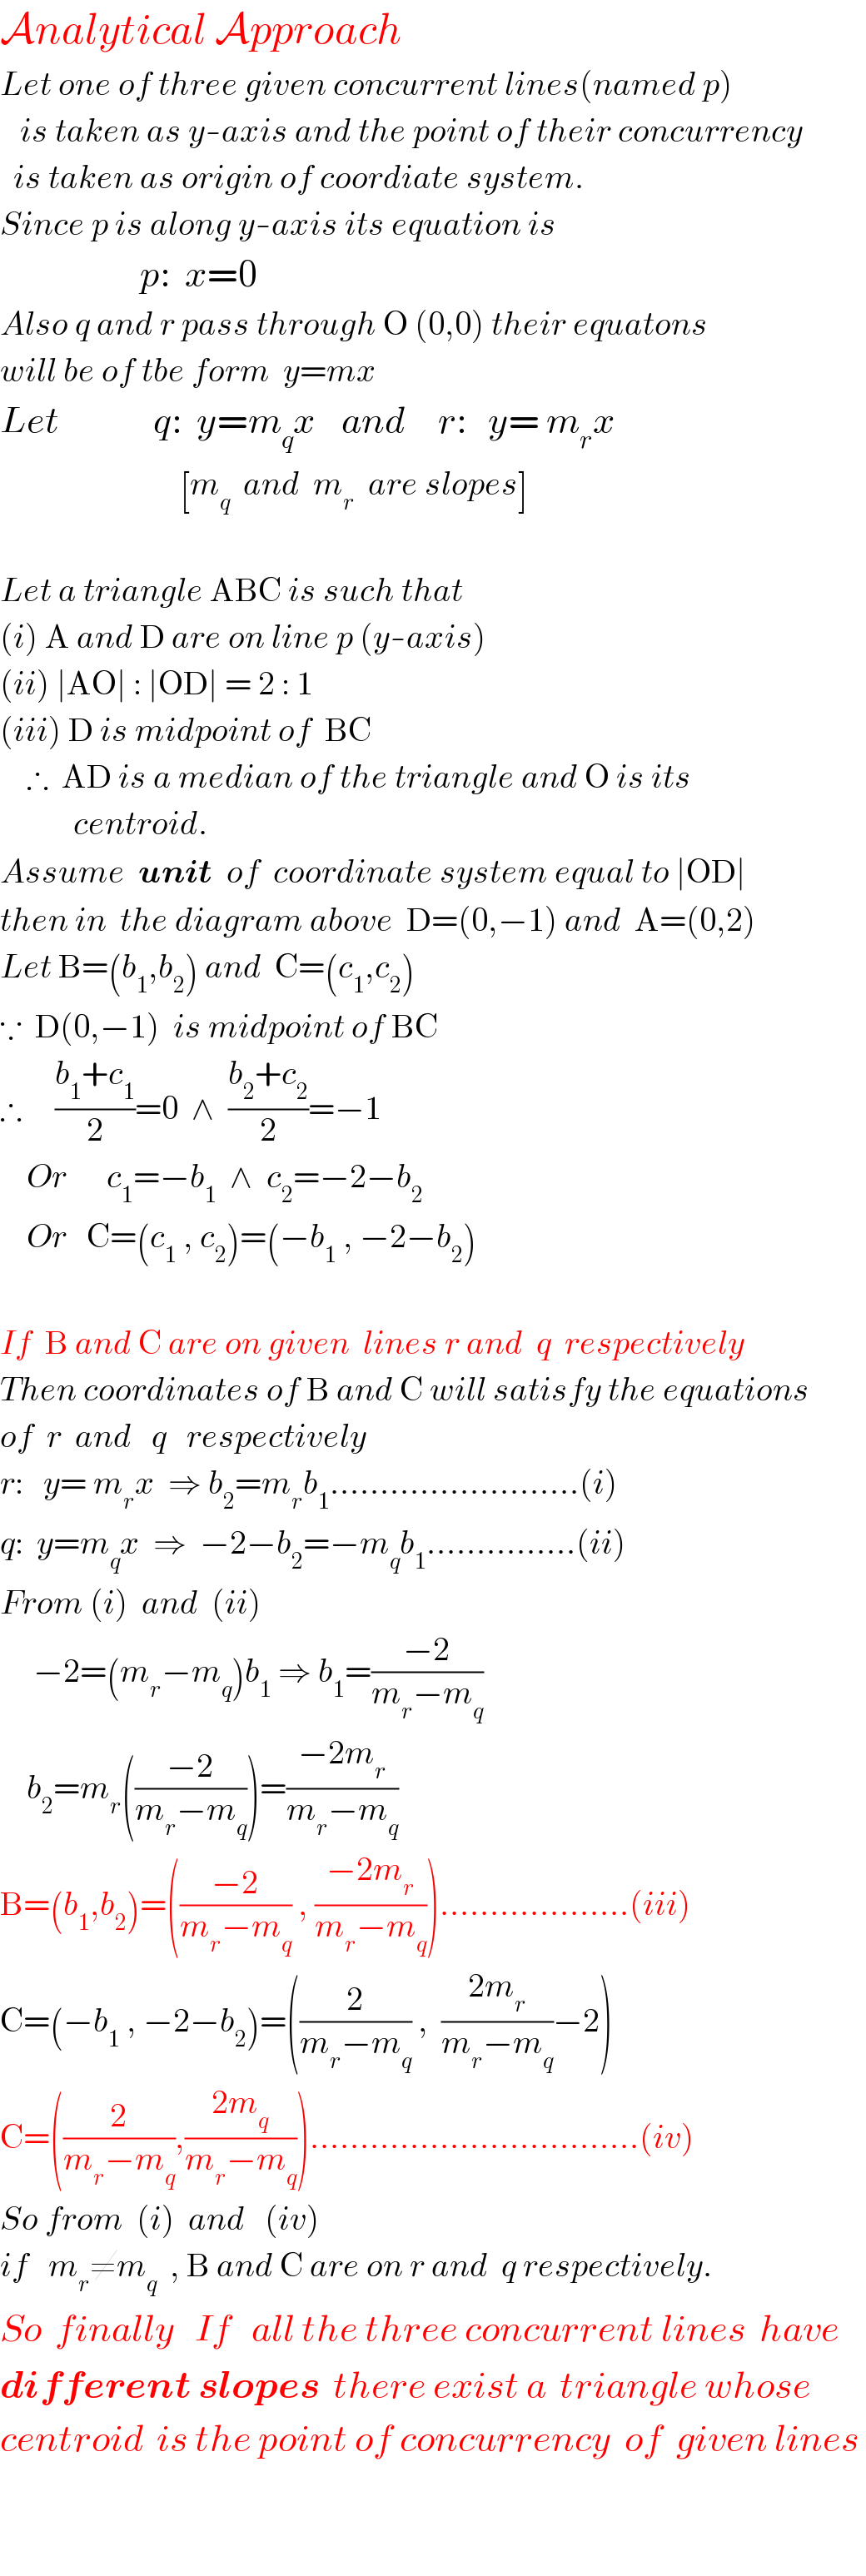 Analytical Approach  Let one of three given concurrent lines(named p)     is taken as y-axis and the point of their concurrency    is taken as origin of coordiate system.  Since p is along y-axis its equation is                       p:  x=0  Also q and r pass through O (0,0) their equatons  will be of tbe form  y=mx  Let              q:  y=m_q x    and     r:   y= m_r x                             [m_q   and  m_r   are slopes]       Let a triangle ABC is such that  (i) A and D are on line p (y-axis)  (ii) ∣AO∣ : ∣OD∣ = 2 : 1  (iii) D is midpoint of  BC      ∴  AD is a median of the triangle and O is its             centroid.  Assume  unit  of  coordinate system equal to ∣OD∣  then in  the diagram above  D=(0,−1) and  A=(0,2)  Let B=(b_1 ,b_2 ) and  C=(c_1 ,c_2 )  ∵  D(0,−1)  is midpoint of BC  ∴     ((b_1 +c_1 )/2)=0  ∧  ((b_2 +c_2 )/2)=−1      Or      c_1 =−b_1   ∧  c_2 =−2−b_2       Or   C=(c_1  , c_2 )=(−b_1  , −2−b_2 )    If  B and C are on given  lines r and  q  respectively  Then coordinates of B and C will satisfy the equations  of  r  and   q   respectively  r:   y= m_r x  ⇒ b_2 =m_r b_1 .........................(i)  q:  y=m_q x  ⇒  −2−b_2 =−m_q b_1 ...............(ii)  From (i)  and  (ii)       −2=(m_r −m_q )b_1  ⇒ b_1 =((−2)/(m_r −m_q ))      b_2 =m_r (((−2)/(m_r −m_q )))=((−2m_r )/(m_r −m_q ))  B=(b_1 ,b_2 )=(((−2)/(m_r −m_q )) , ((−2m_r )/(m_r −m_q )))...................(iii)  C=(−b_1  , −2−b_2 )=((2/(m_r −m_q )) ,  ((2m_r )/(m_r −m_q ))−2)  C=((2/(m_r −m_q )),((2m_q )/(m_r −m_q ))).................................(iv)  So from  (i)  and   (iv)   if   m_r ≠m_q   , B and C are on r and  q respectively.  So  finally   If   all the three concurrent lines  have   different slopes  there exist a  triangle whose  centroid  is the point of concurrency  of  given lines       